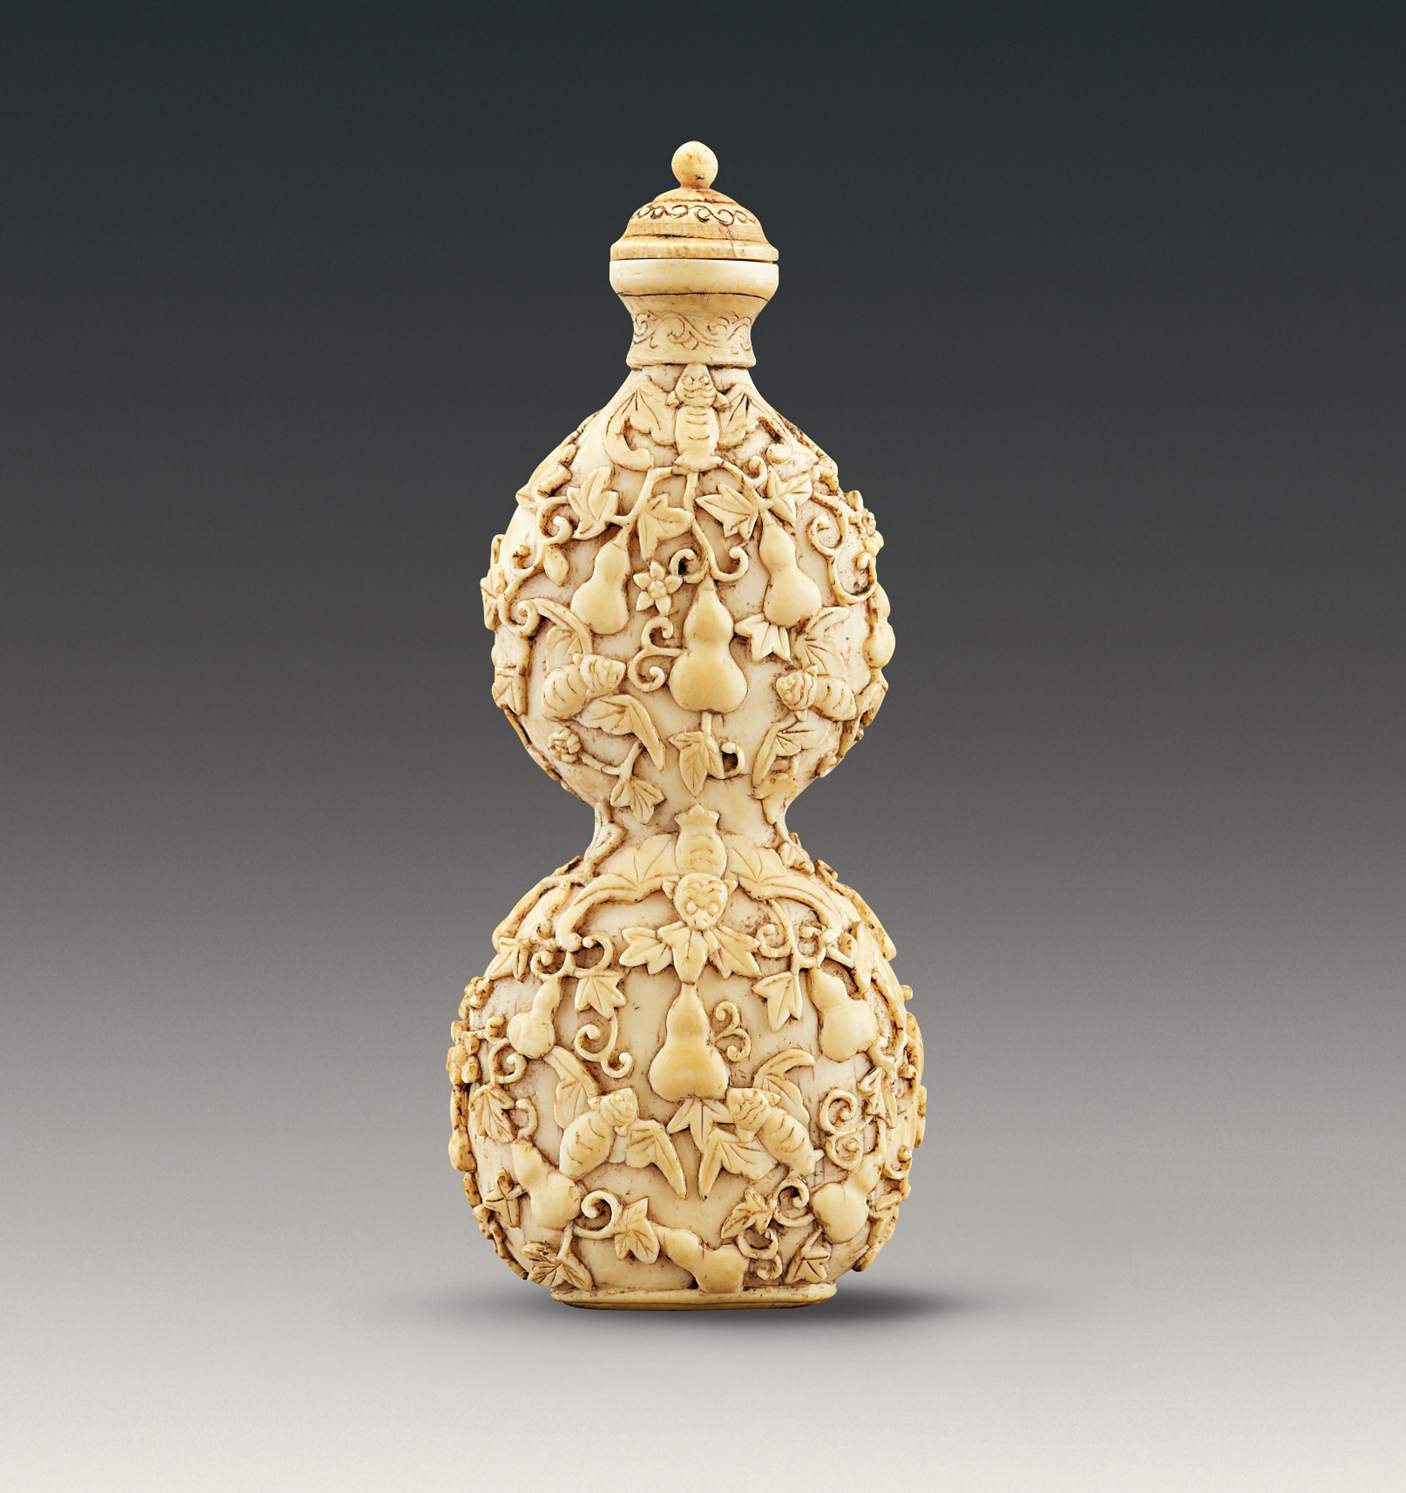 The Hong Kong Museum of Art today (September 28) announced that Christopher and Josephine Sin generously donated nearly 500 pieces of Chinese snuff bottles from the Fuyun Xuan Collection of Chinese Snuff Bottles for the museum's permanent collection. Picture shows the newly donated double-gourd-shaped ivory snuff bottle carved with gourds design. This bottle is carved from ivory in the form of a thin gourd. This miniature bottle is carved in low relief with nearly 40 gourds and bats patterns, demonstrating exceptional craftmanship.